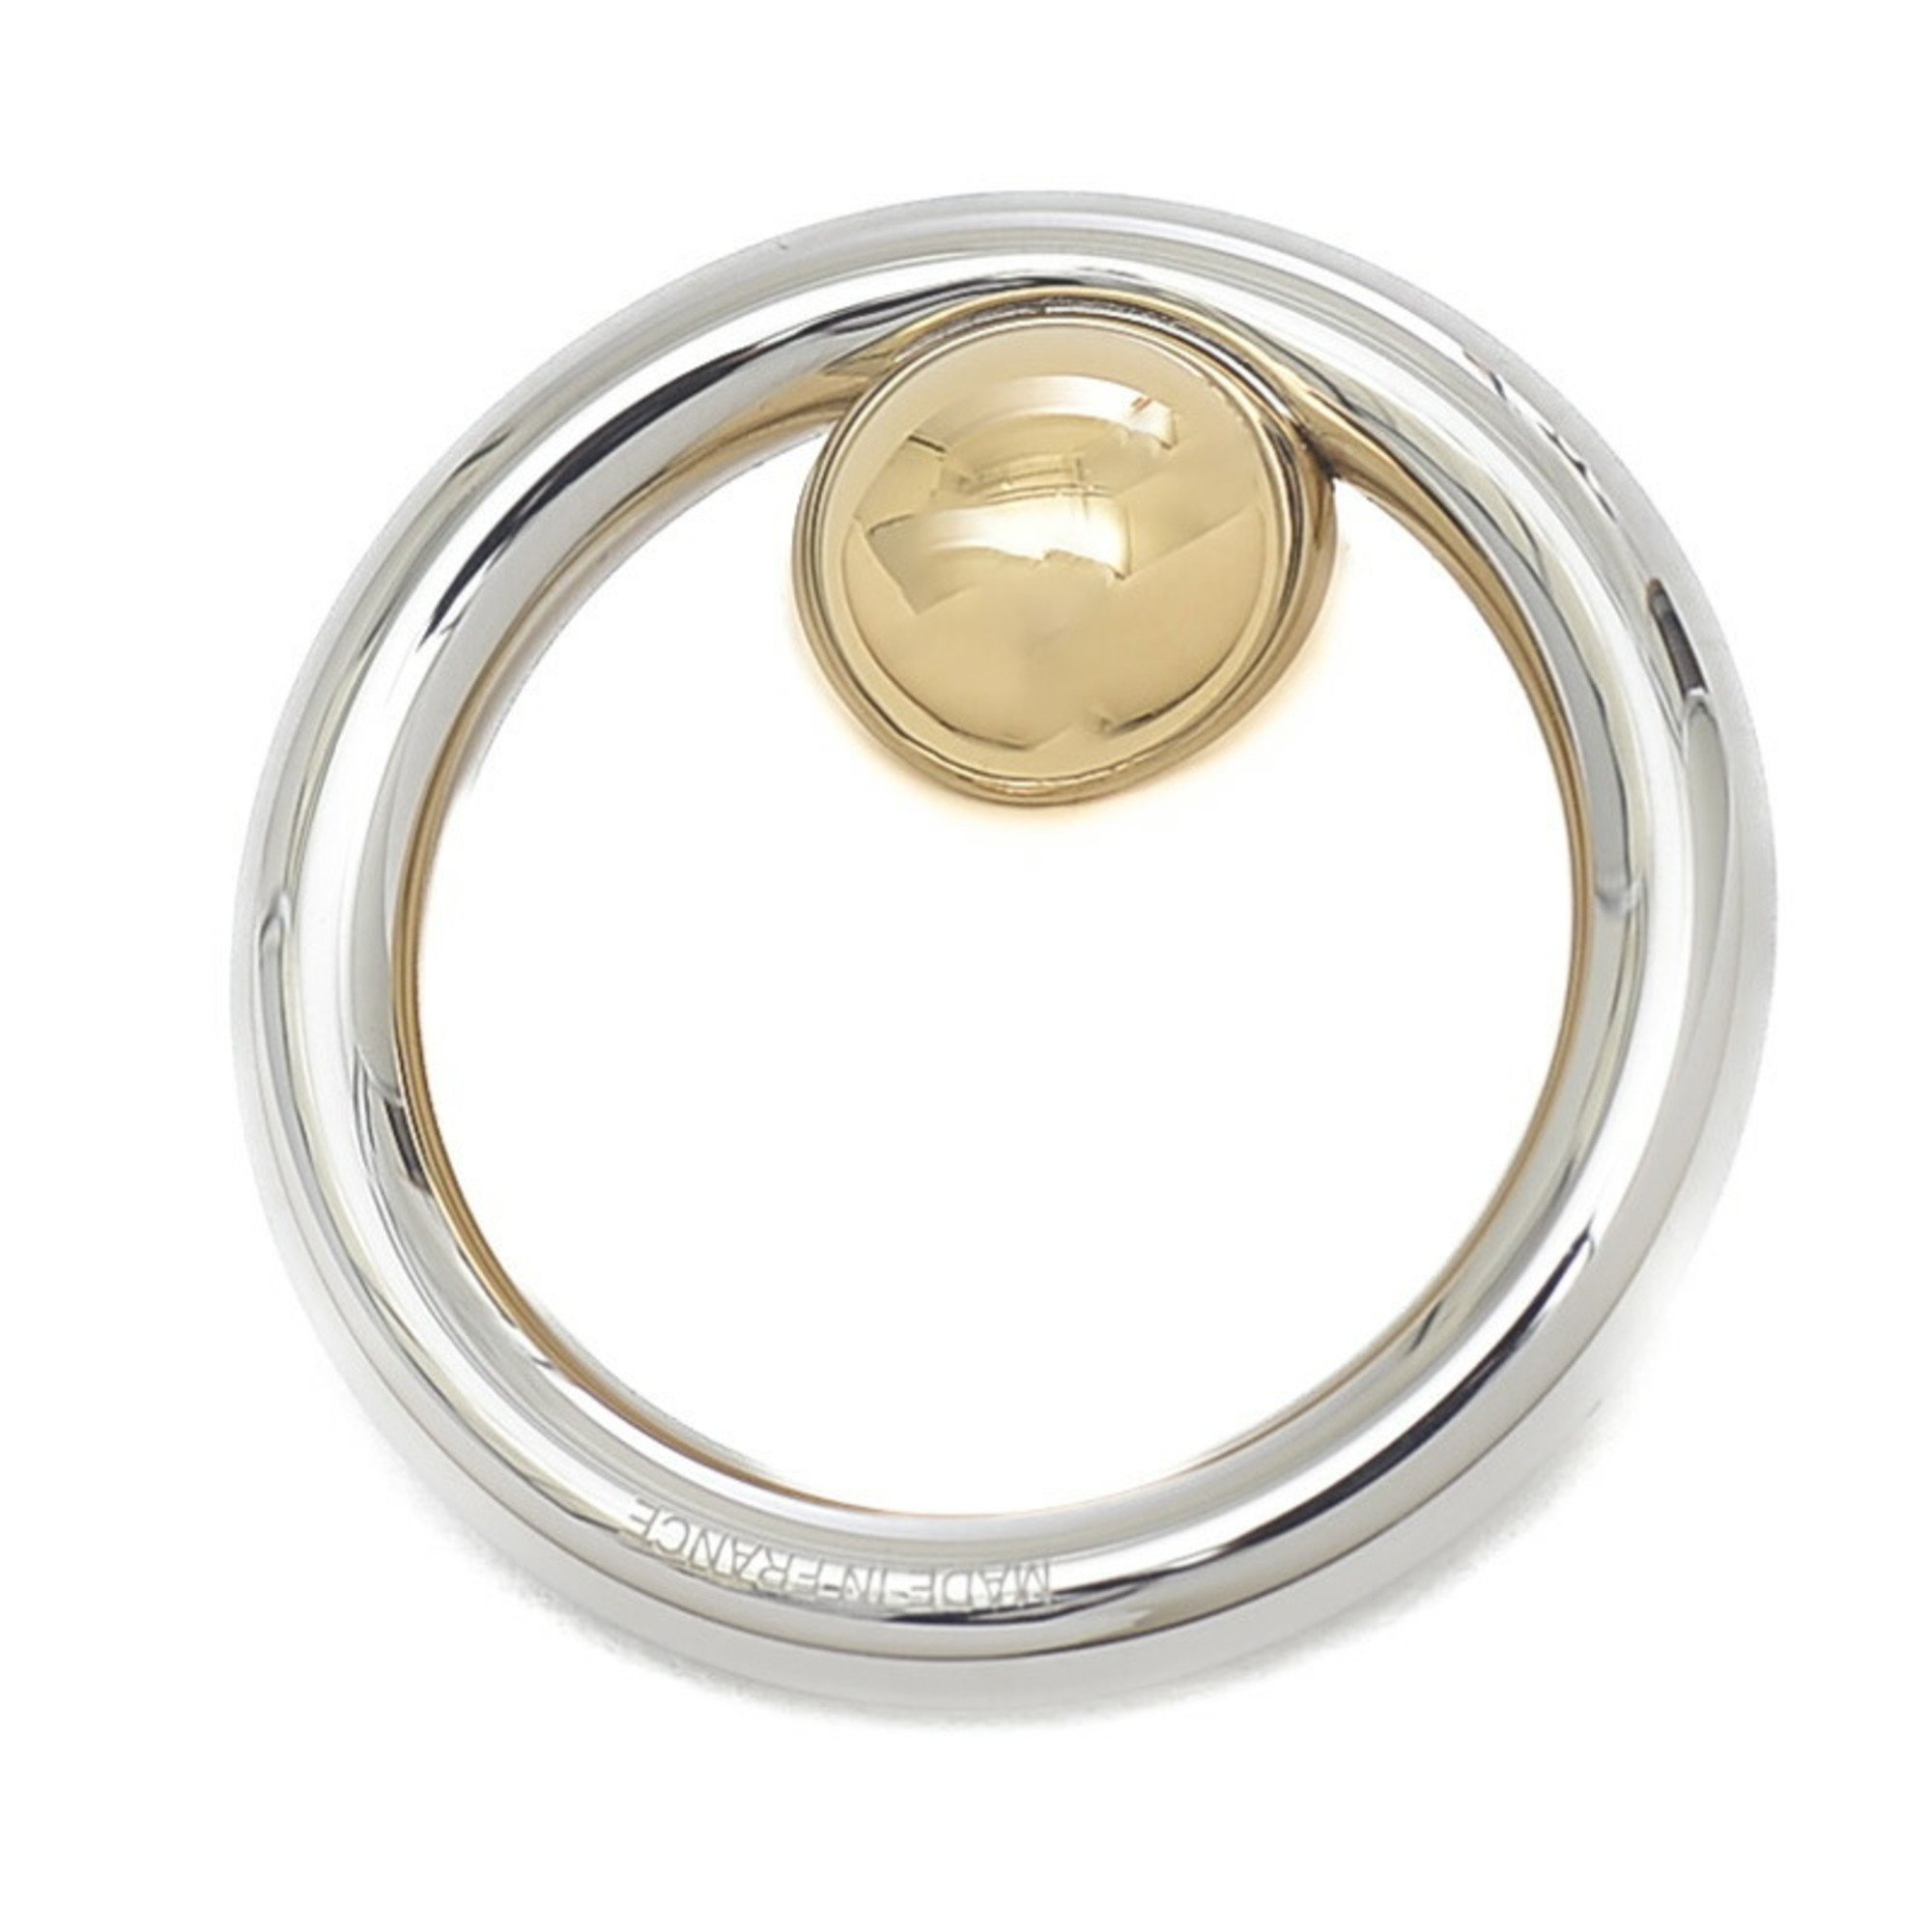 Hermes Scarf Ring Saturne 70 Silver/Gold